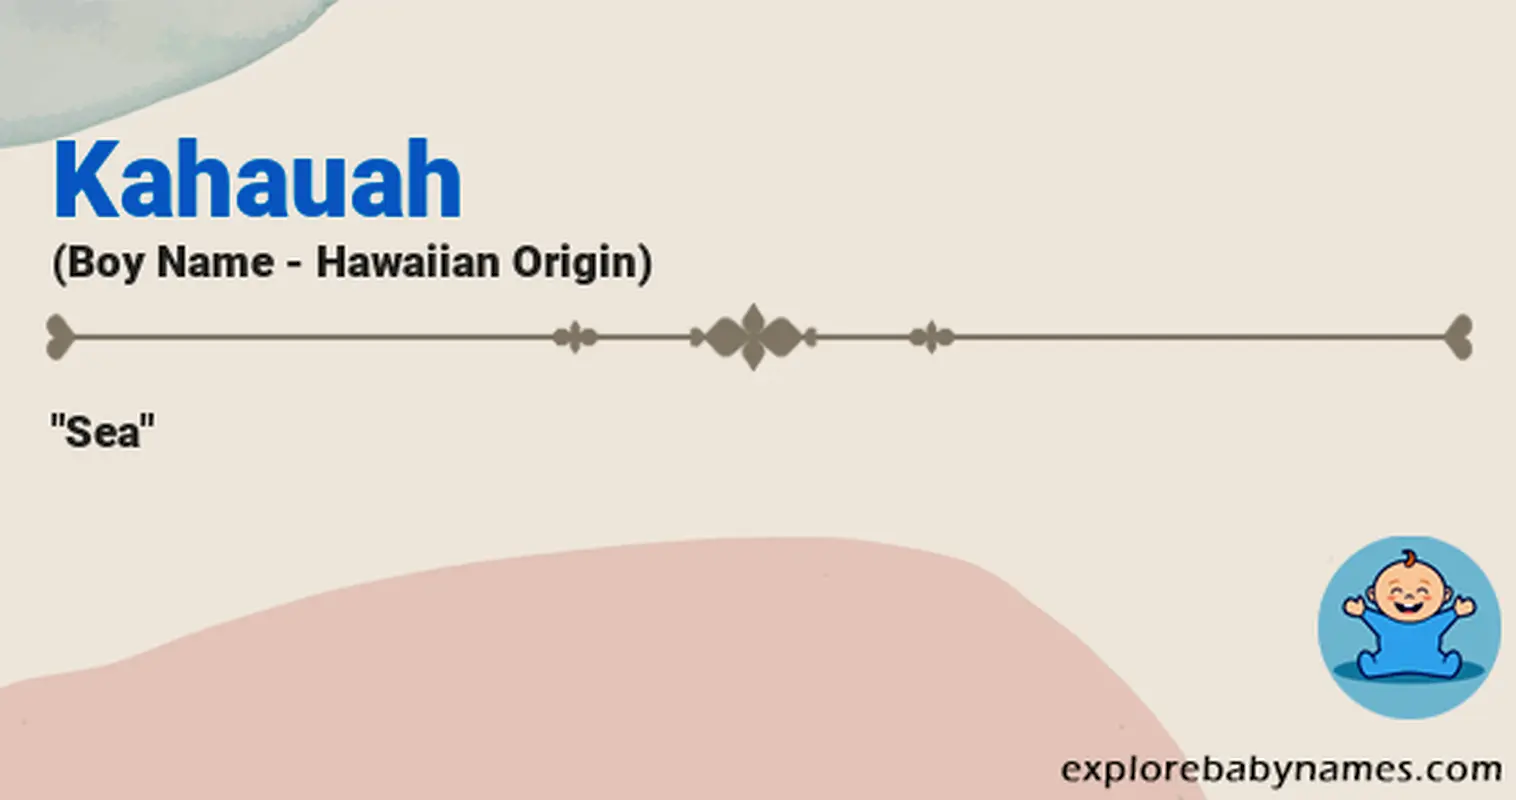 Meaning of Kahauah